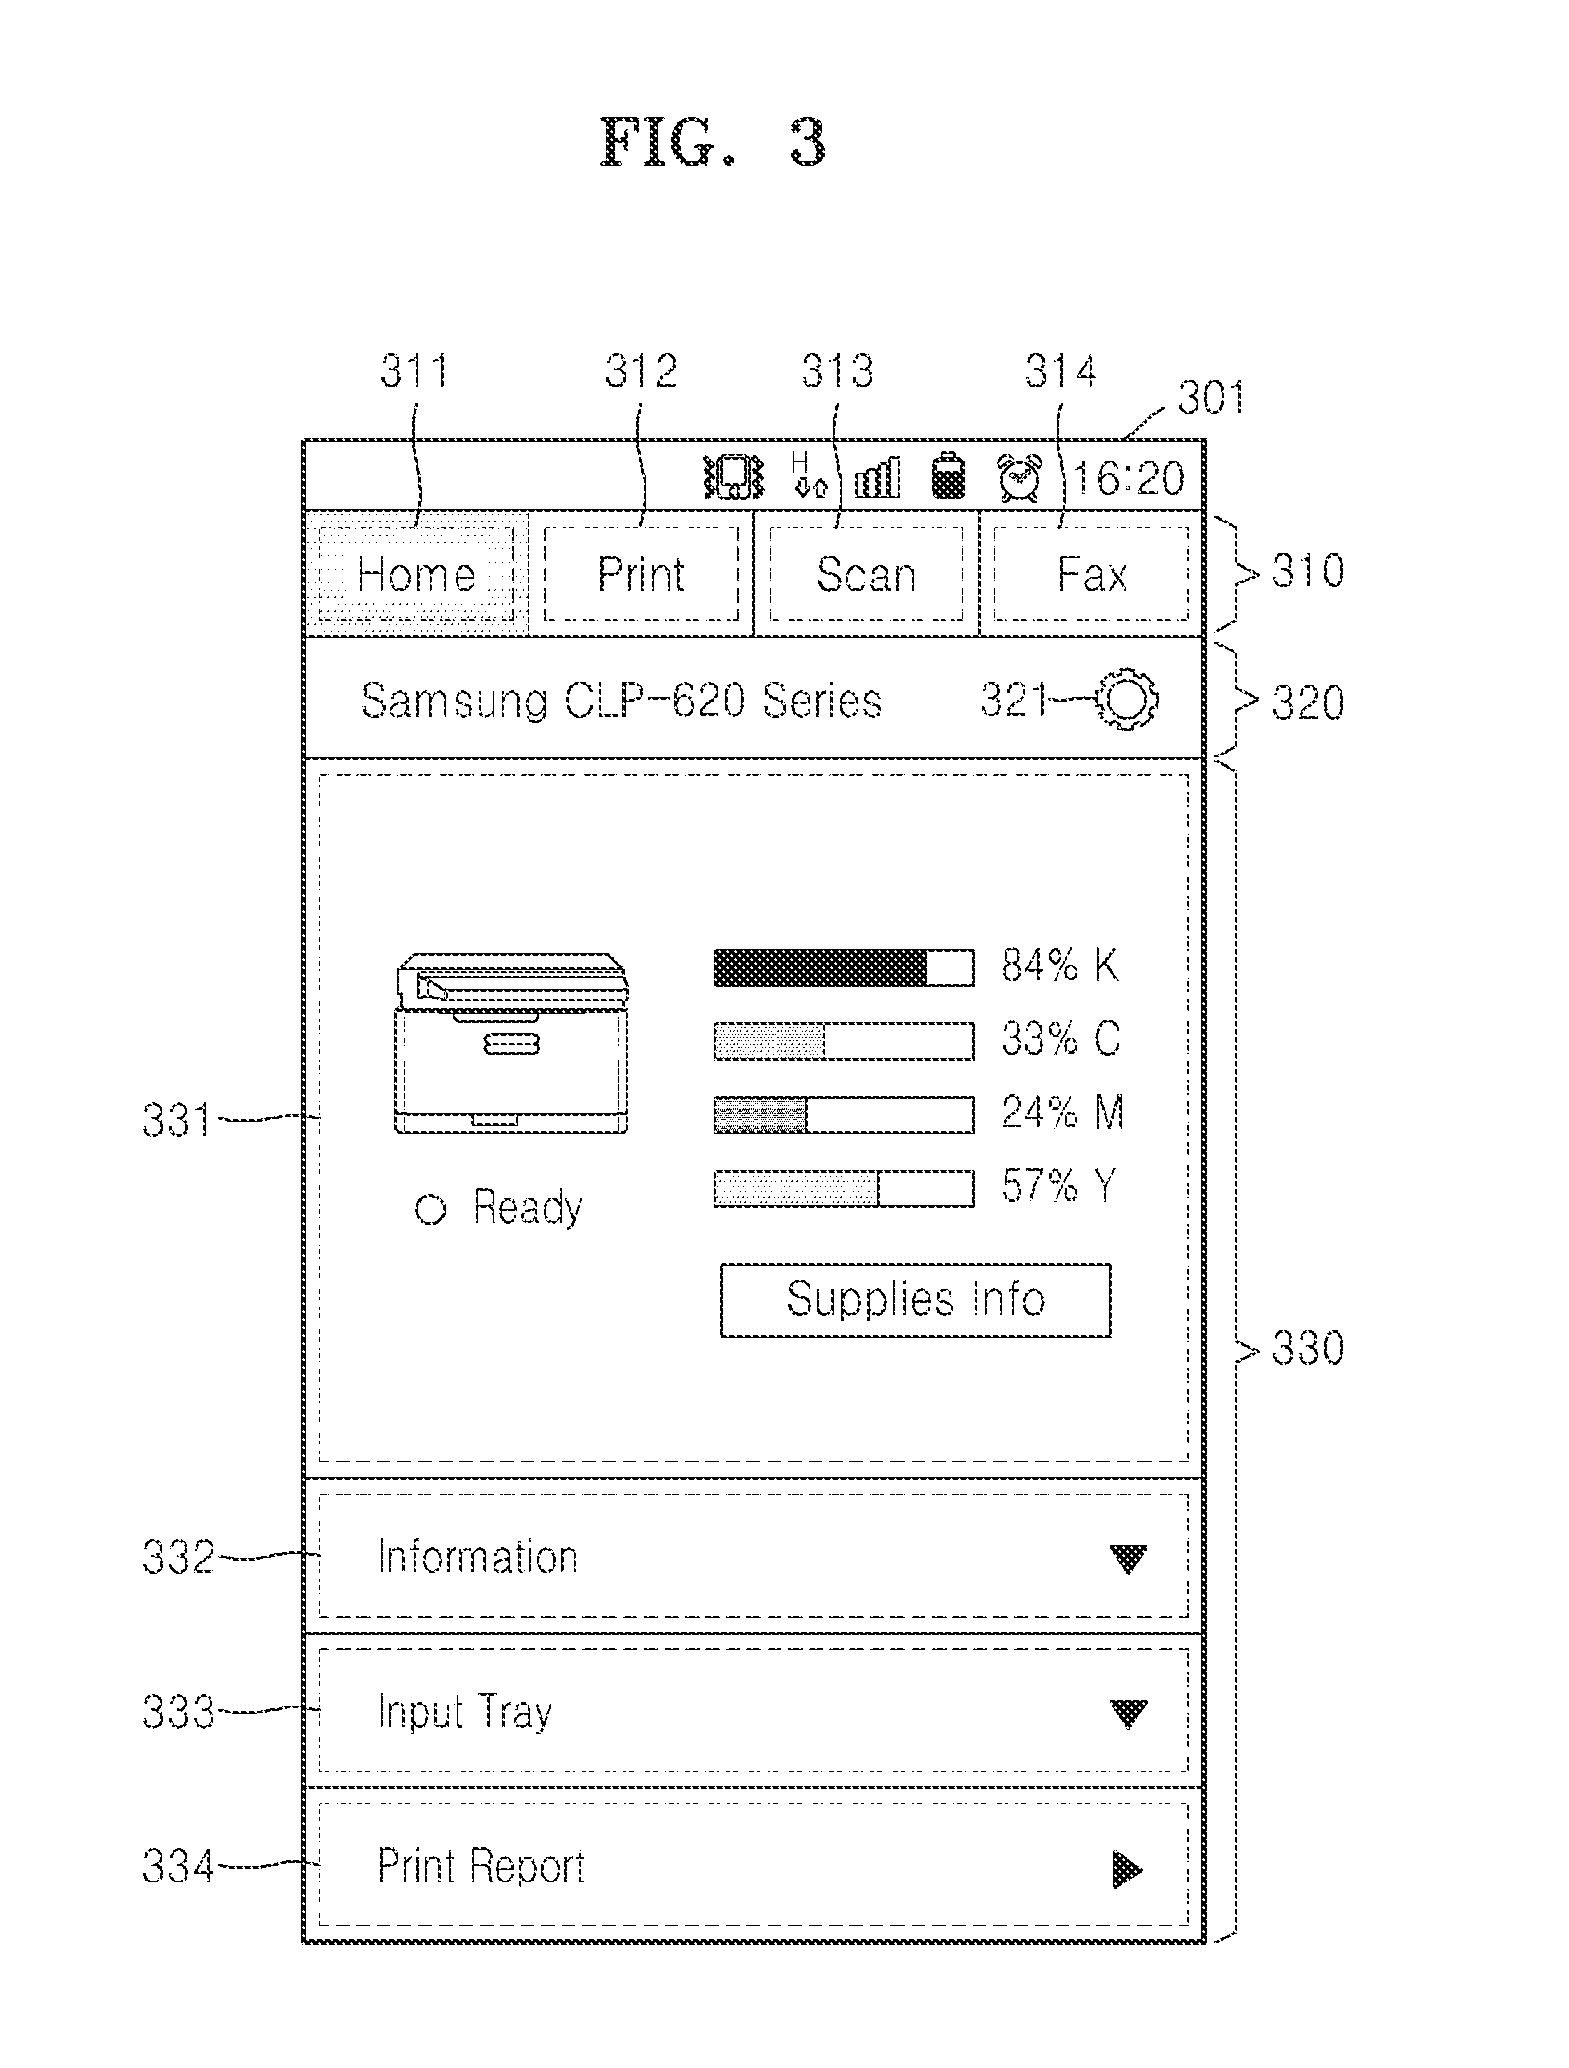 System and method of mobile printing using near field communication